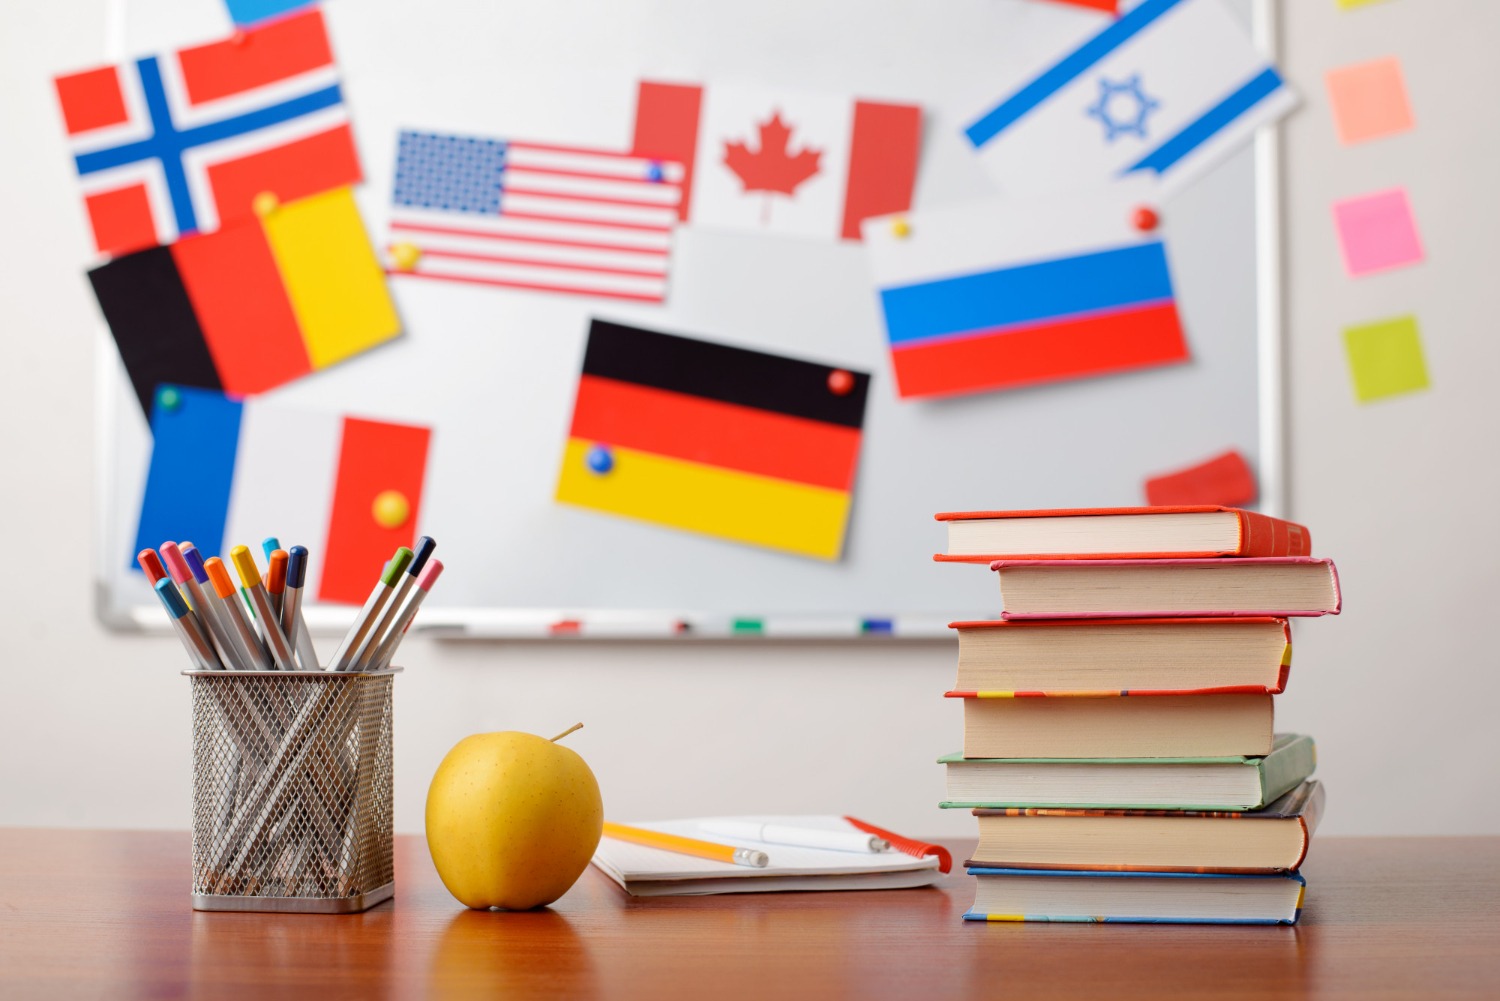 stack-books-front-school-whiteboard-with-flags-different-countries (1)